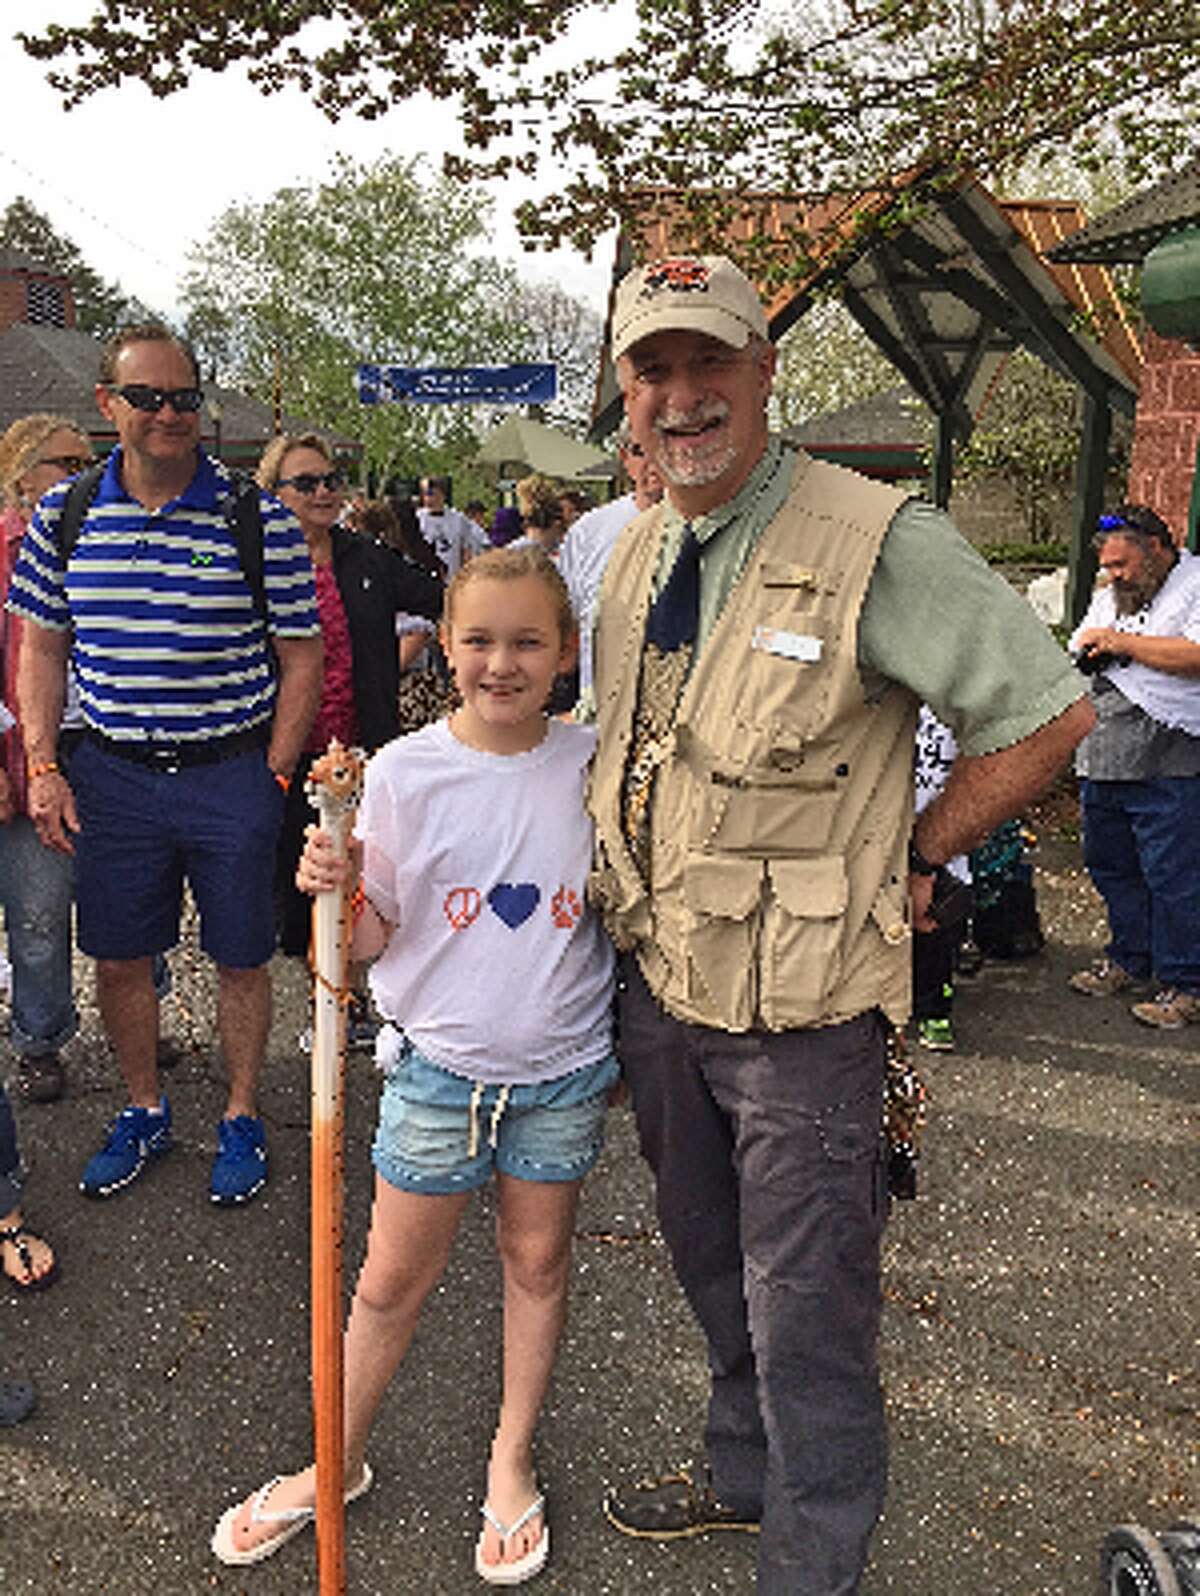 Trumbull student Samantha Petiprin, 10, and Zoo Director Gregg Dancho at Saturday’s Tiger Trot.